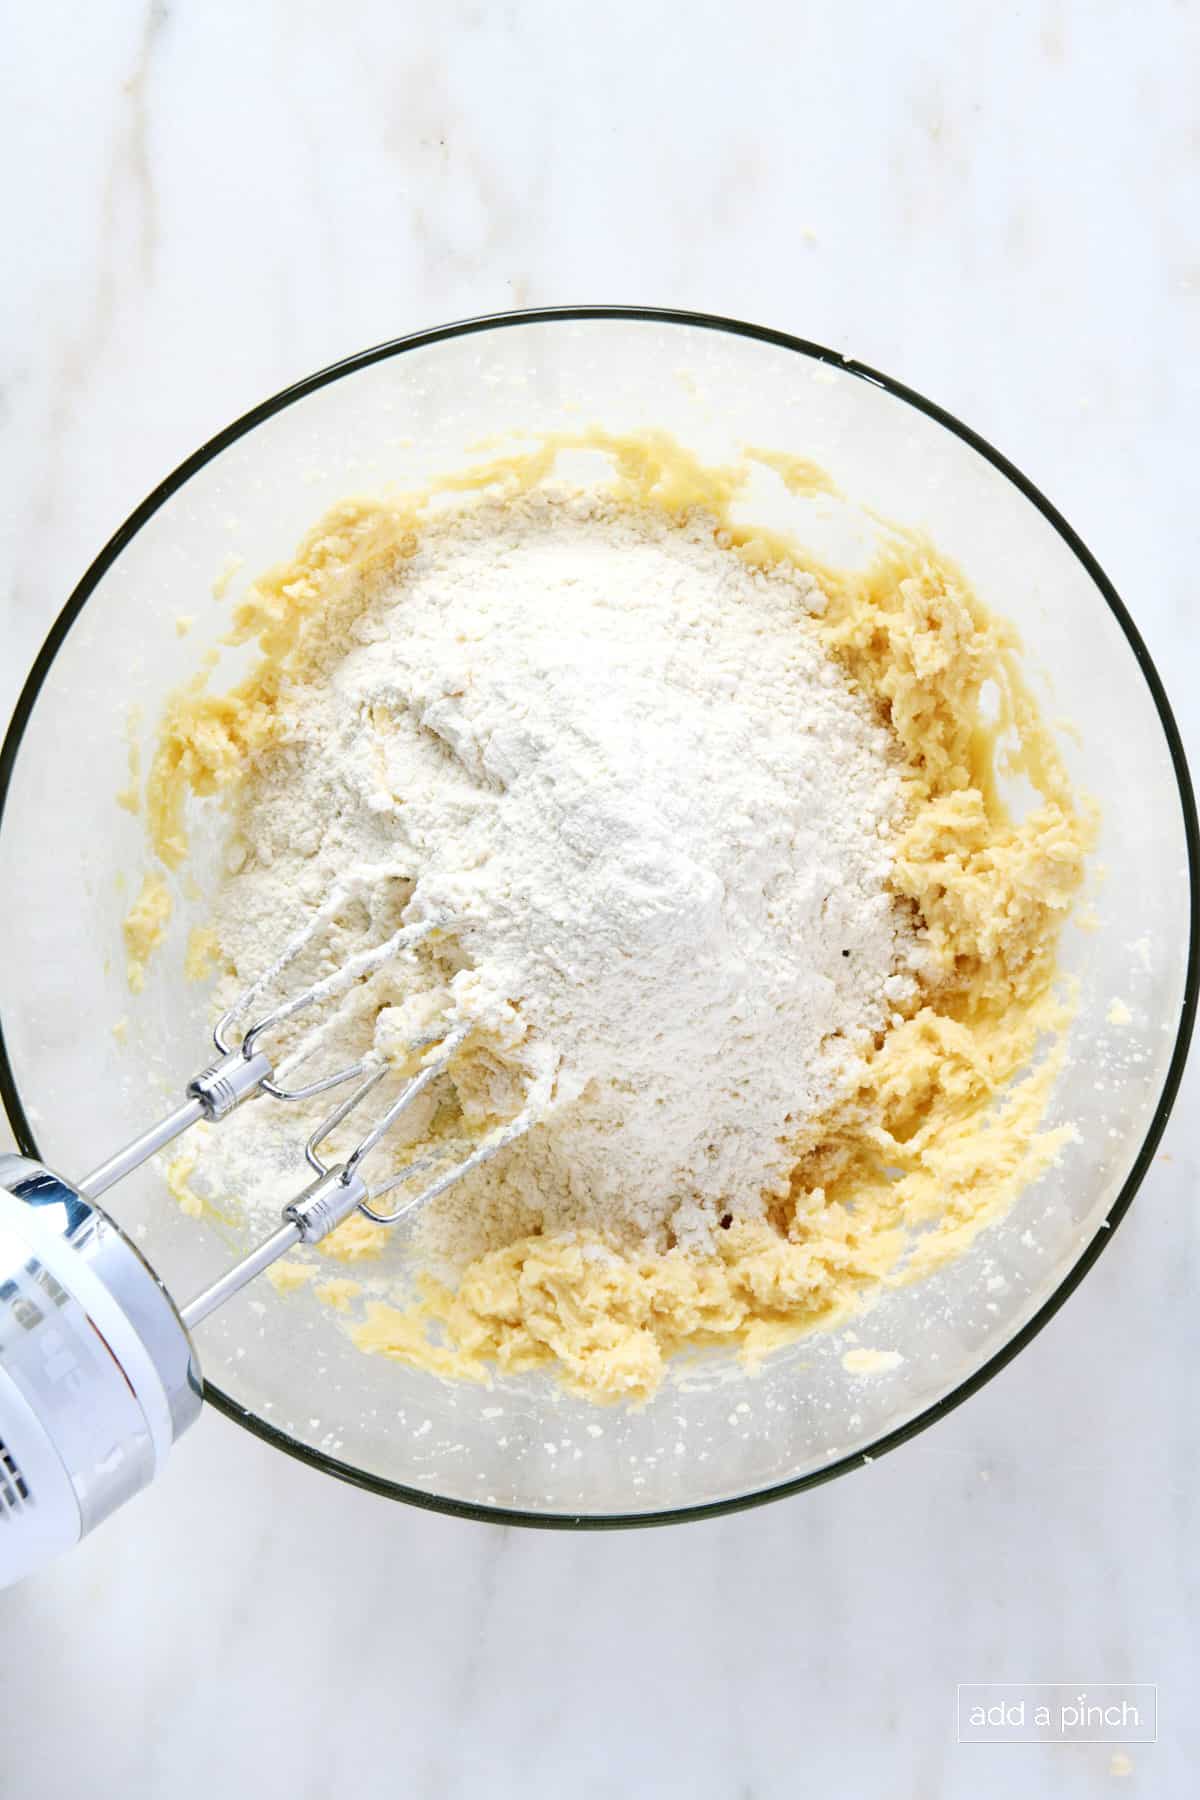 Flour added to cookie dough mixture in a glass bowl with a hand mixer.